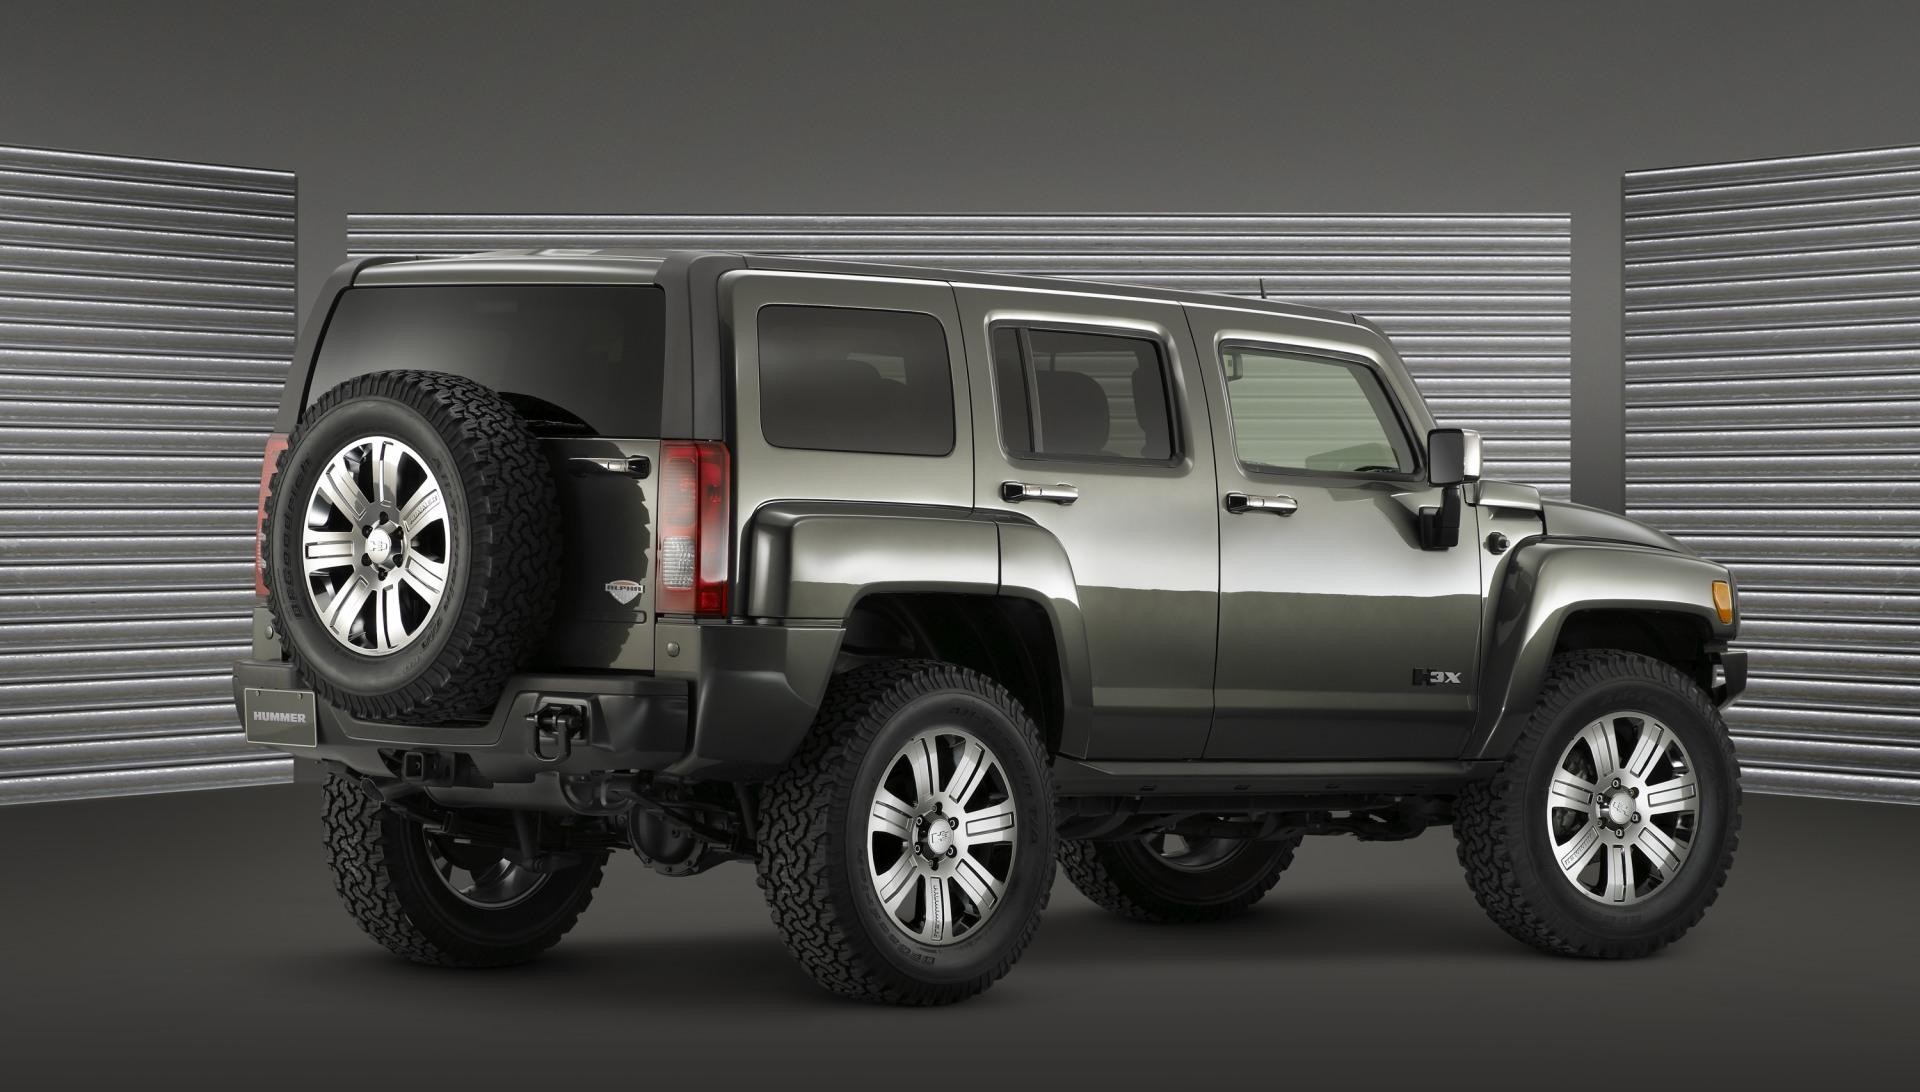 1920x1092 2009 Hummer H3 X Concept Pictures, News, Research, Pricing - conceptcarz.com